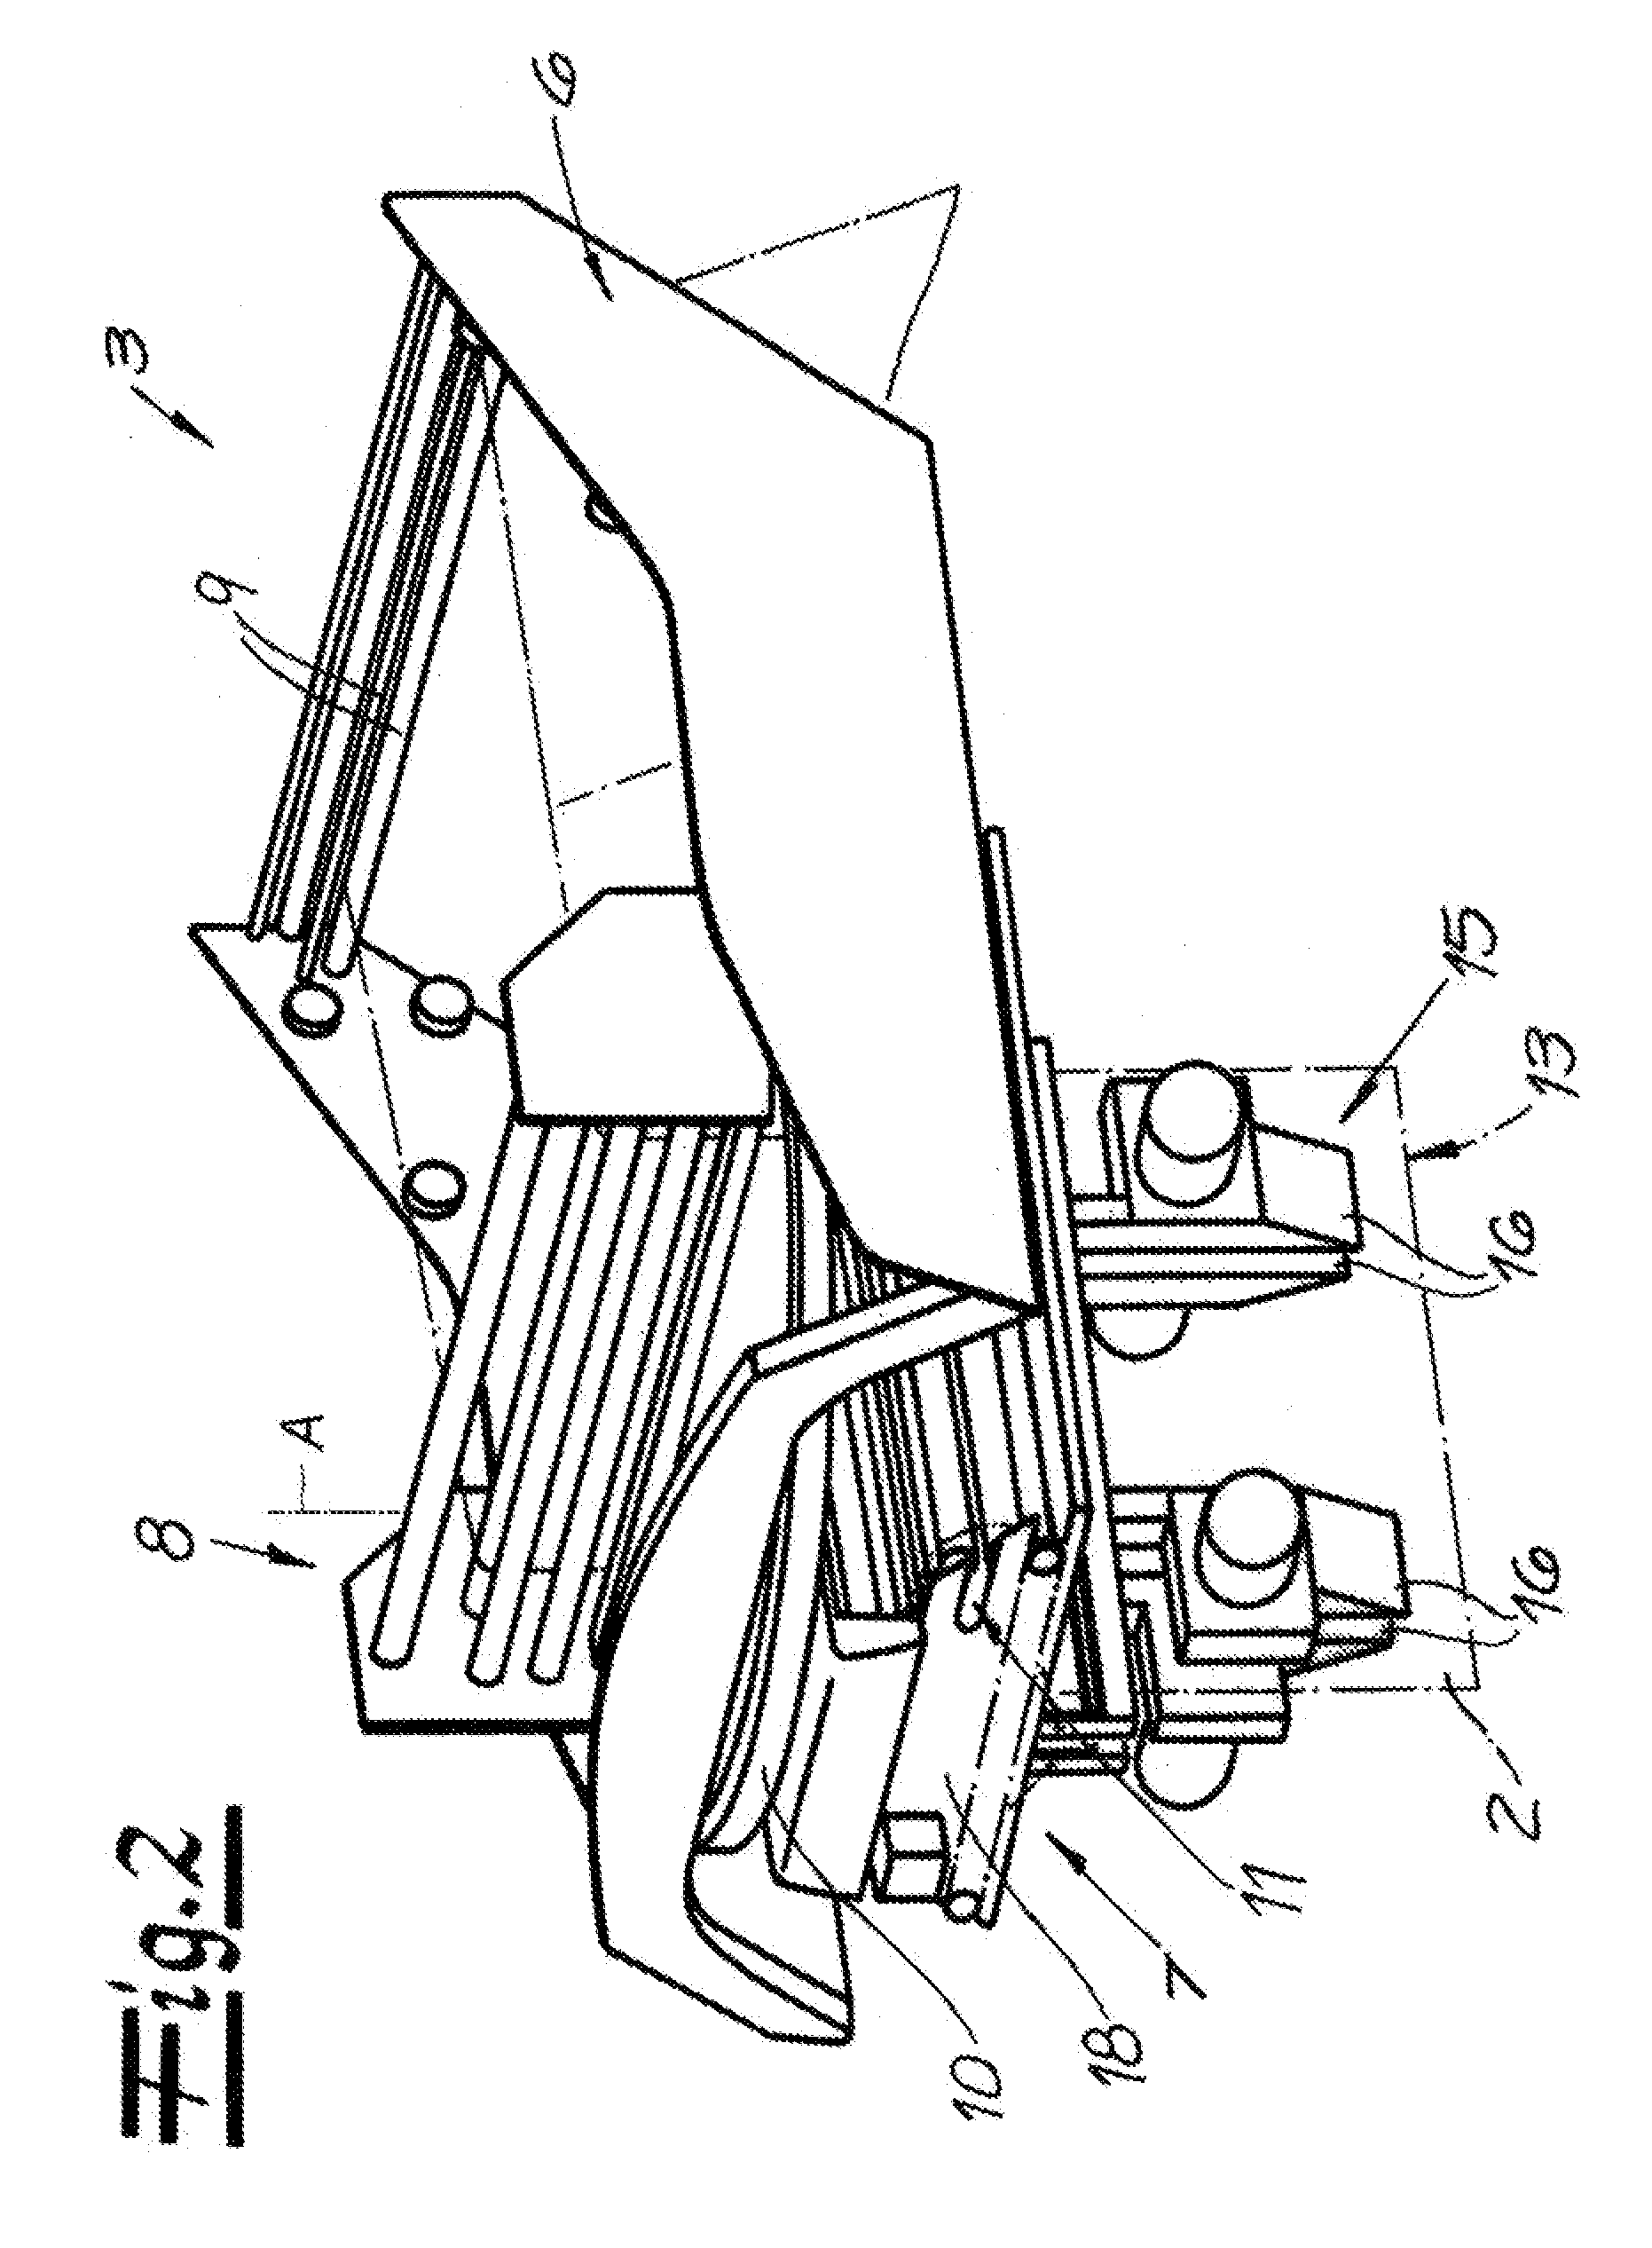 Method and apparatus for wrapping a foil around a stack of objects